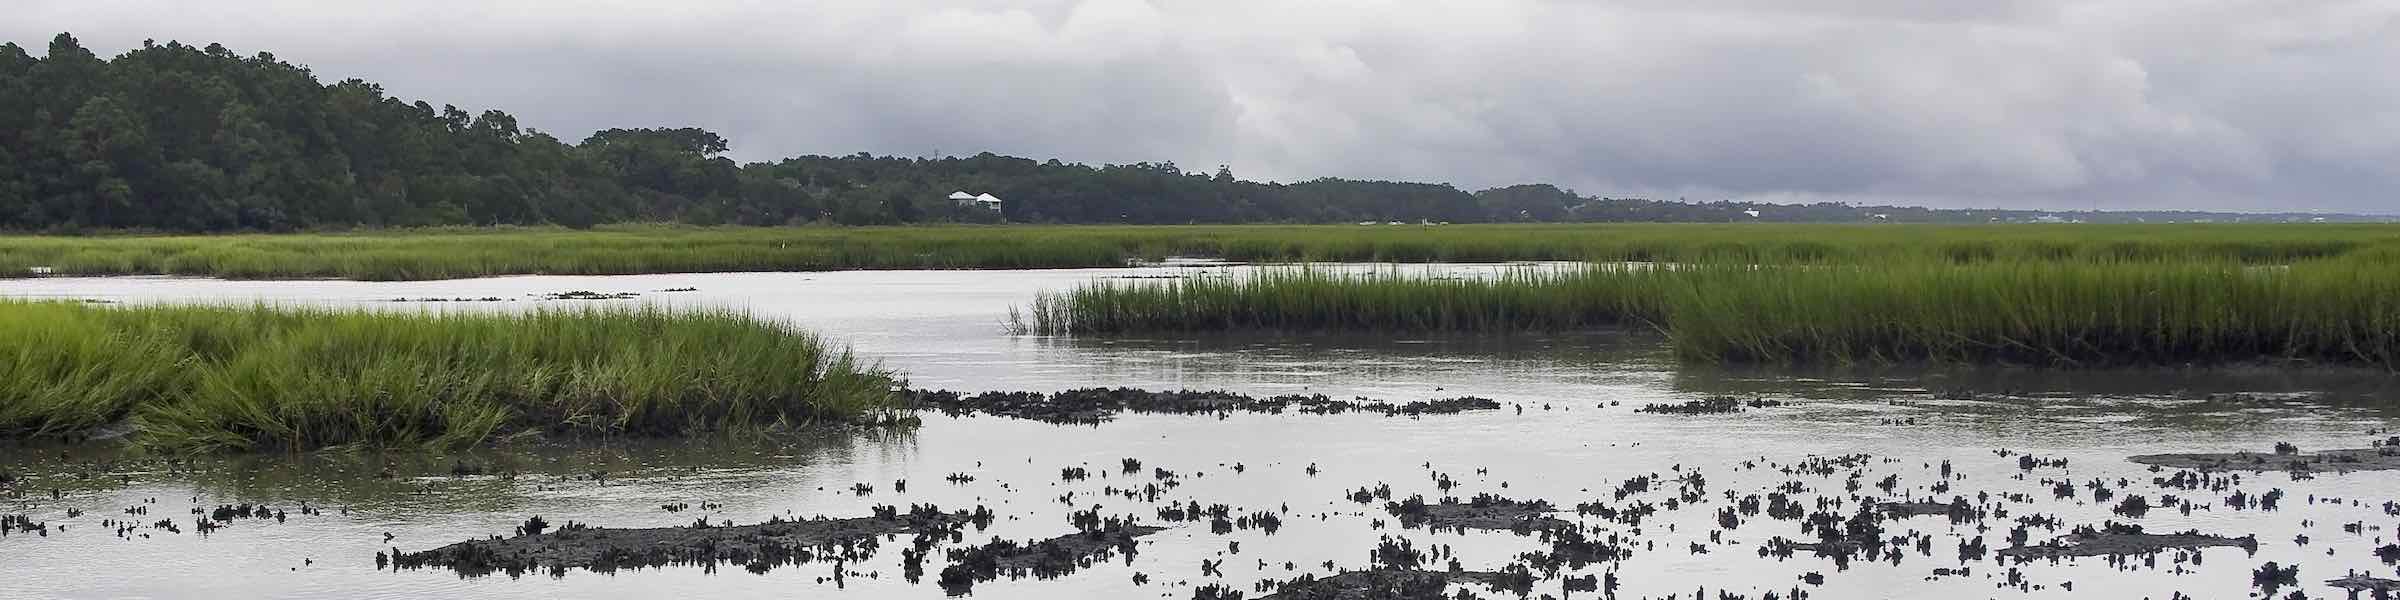 View of the marshes at Huntington Beach State Park, near Myrtle Beach, SC on a cloudy day.